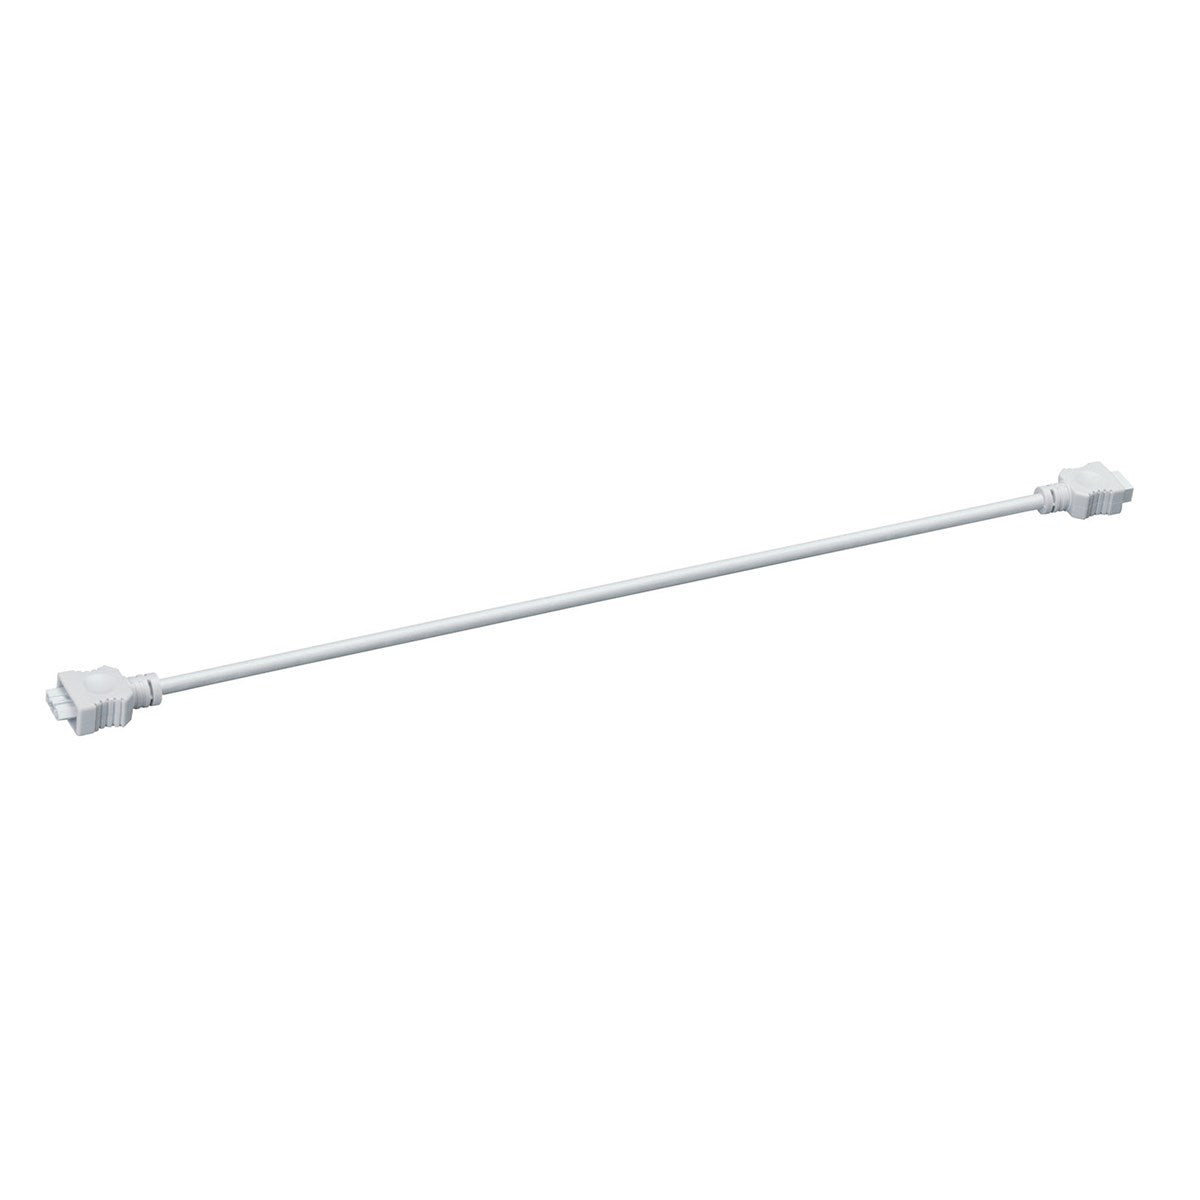 21in. Interconnect Cable for 6U Under cabinet lights, White - Bees Lighting